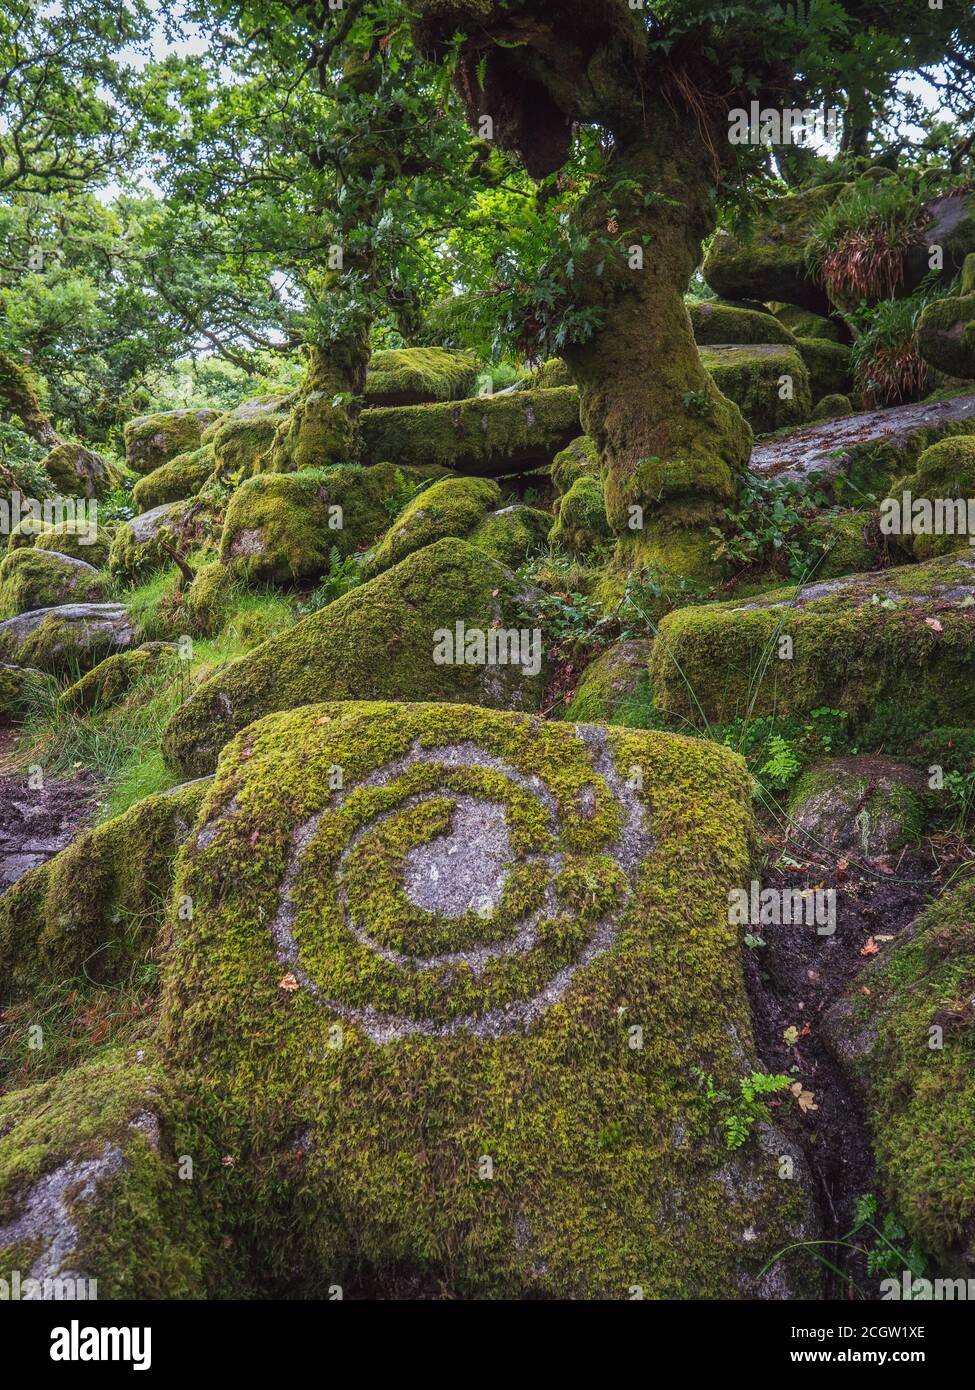 Twisted, gnarled dwarf oak trees growing among rocks in a mossy wood Stock Photo